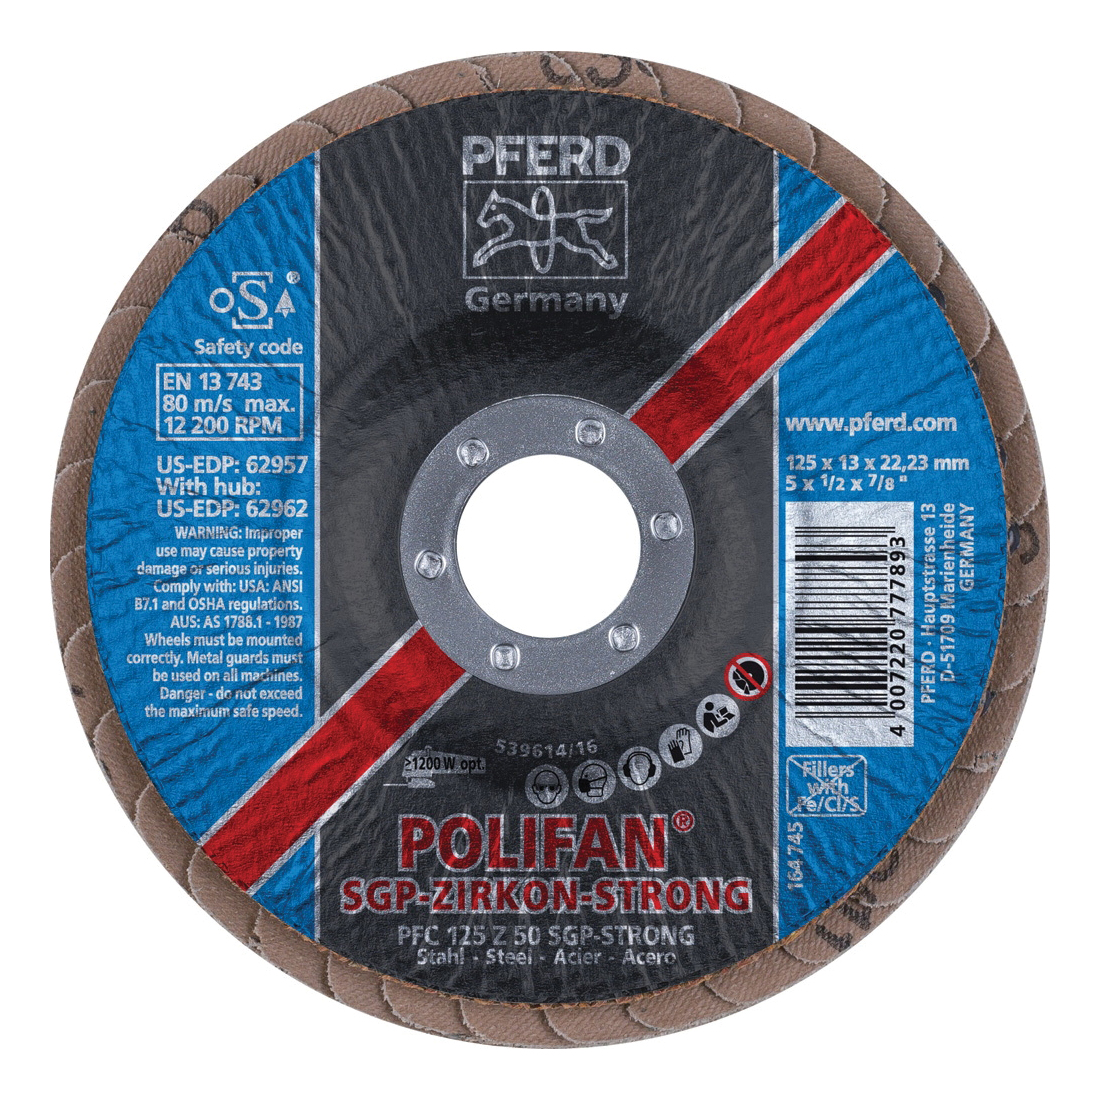 PFERD Polifan® 62957 Special Line SGP Z-STRONG Unthreaded Coated Abrasive Flap Disc, 5 in Dia, 7/8 in Center Hole, 50 Grit, Zirconia Alumina Abrasive, Type 29 Conical Disc